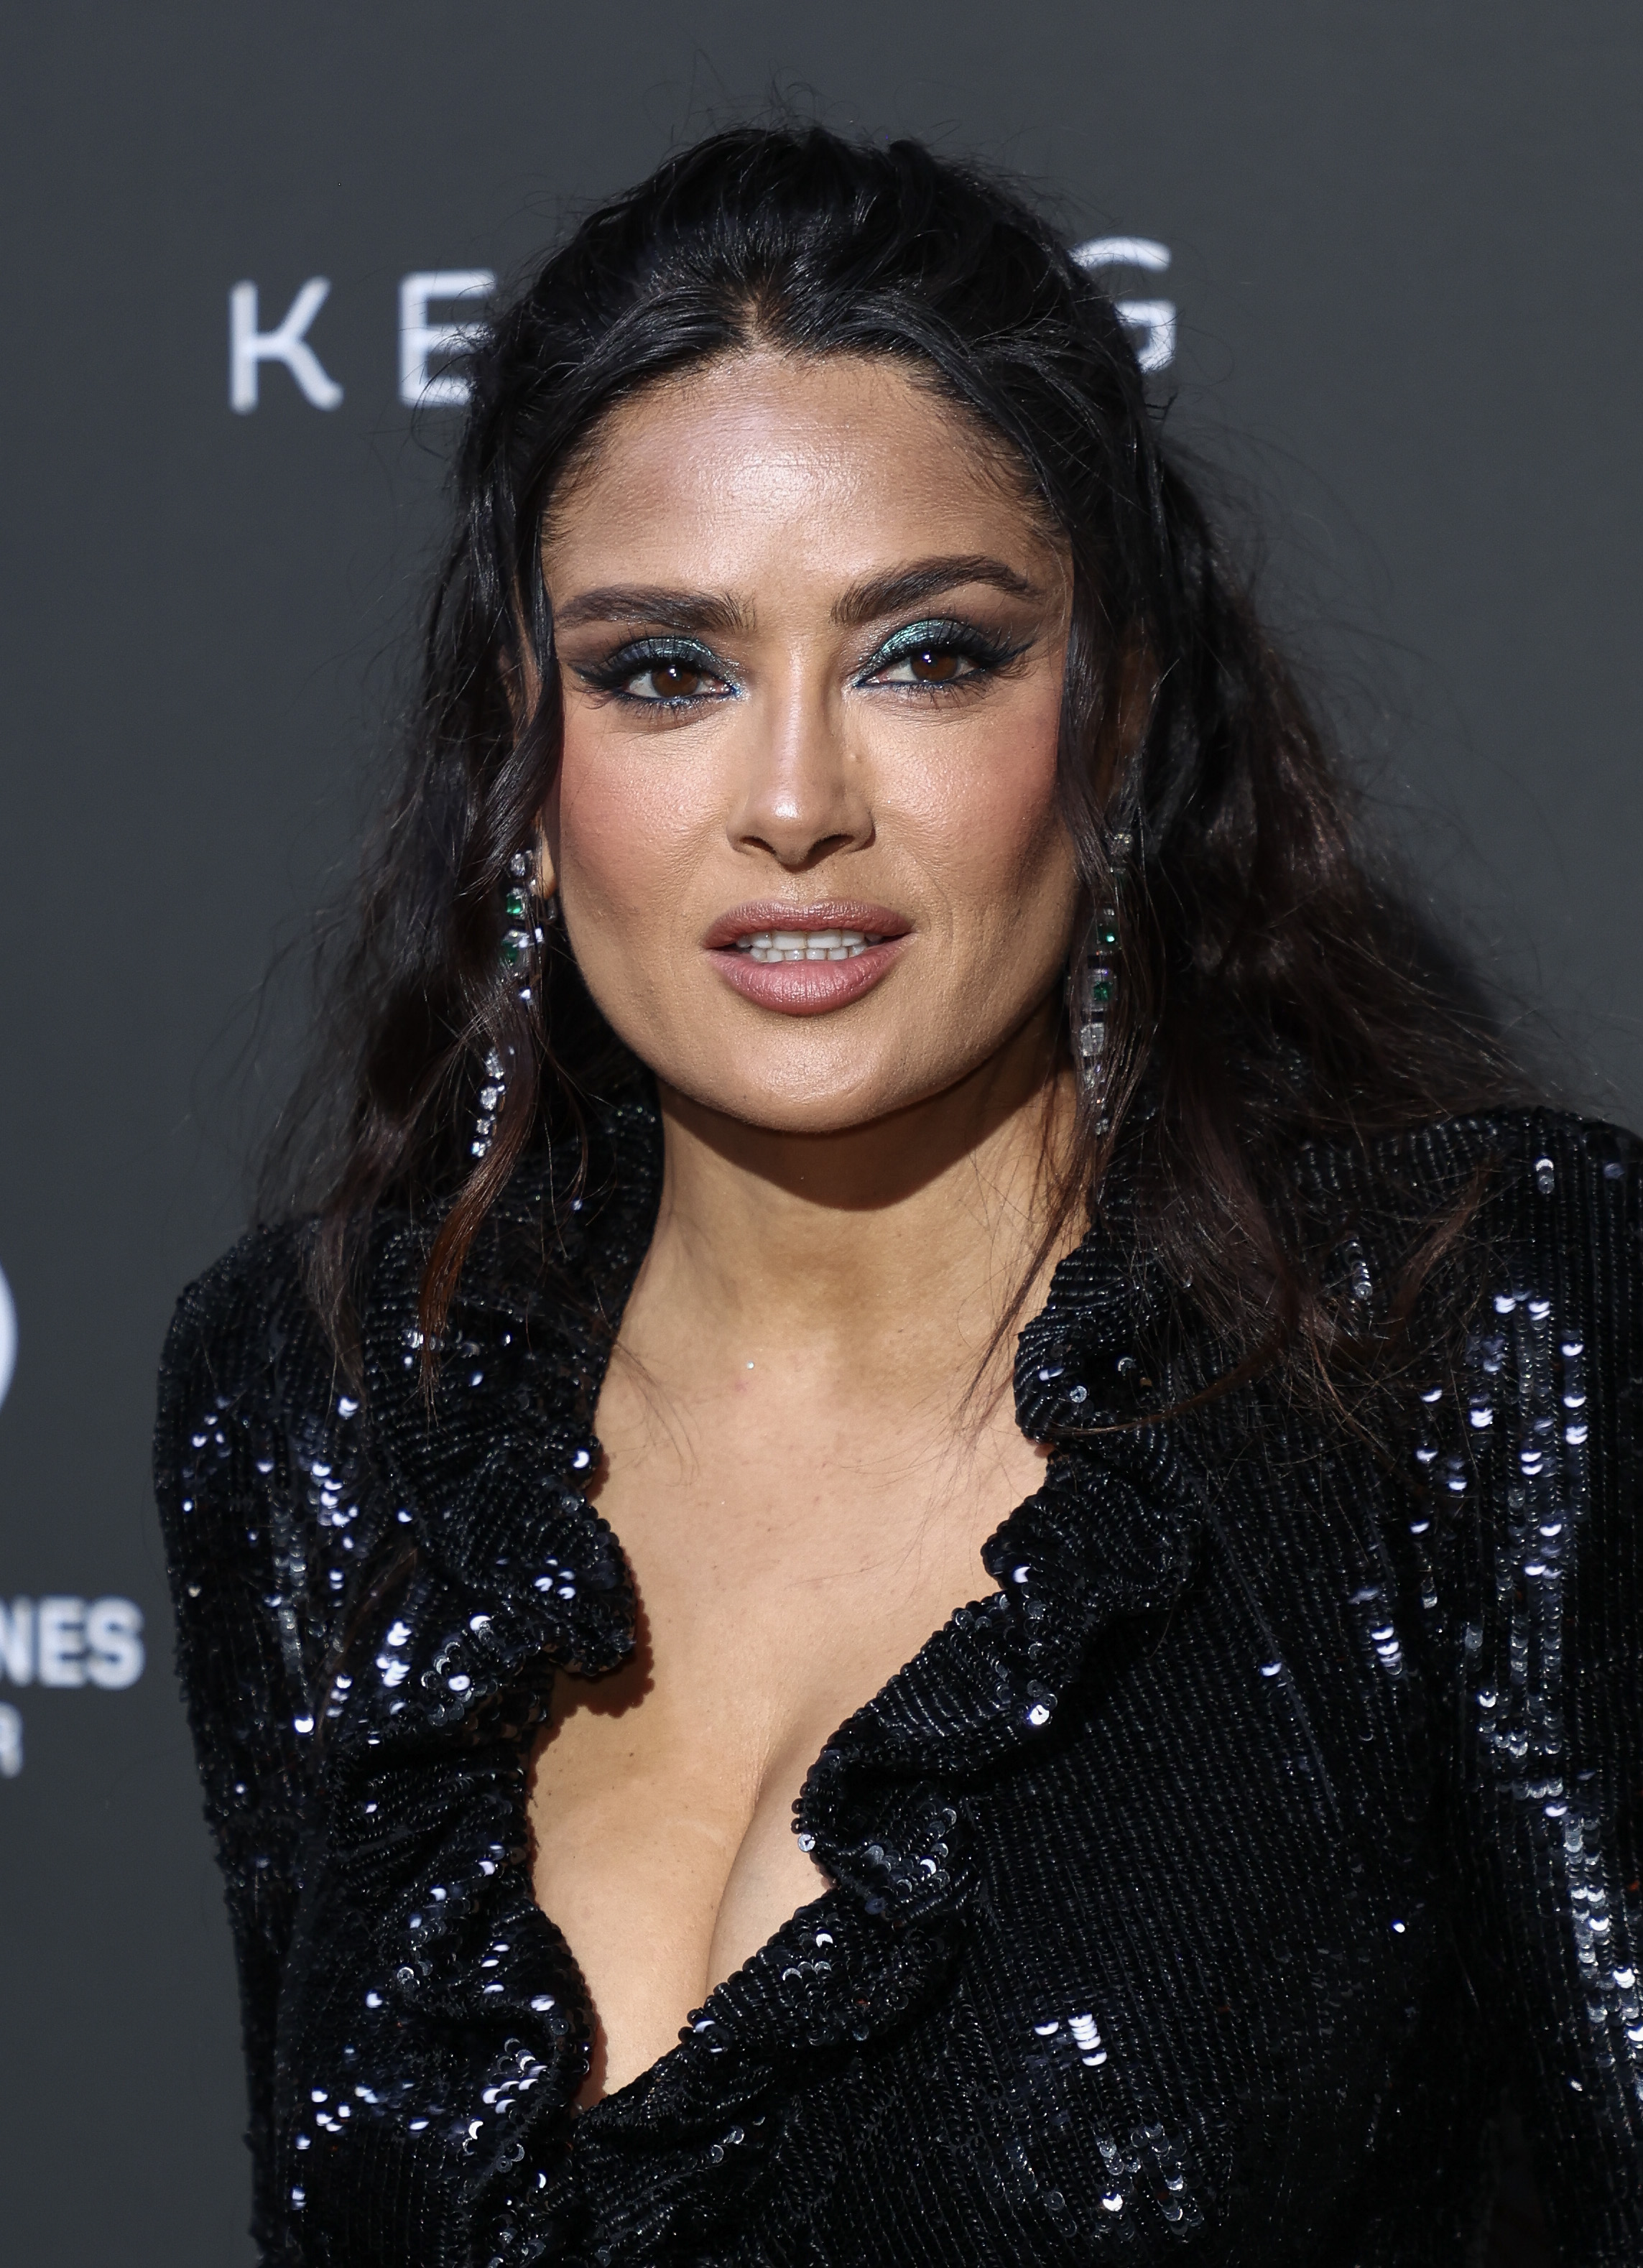 Salma Hayek at the 2023 "Kering Women in Motion Award" during the 76th annual Cannes film festival | Source: Getty Images